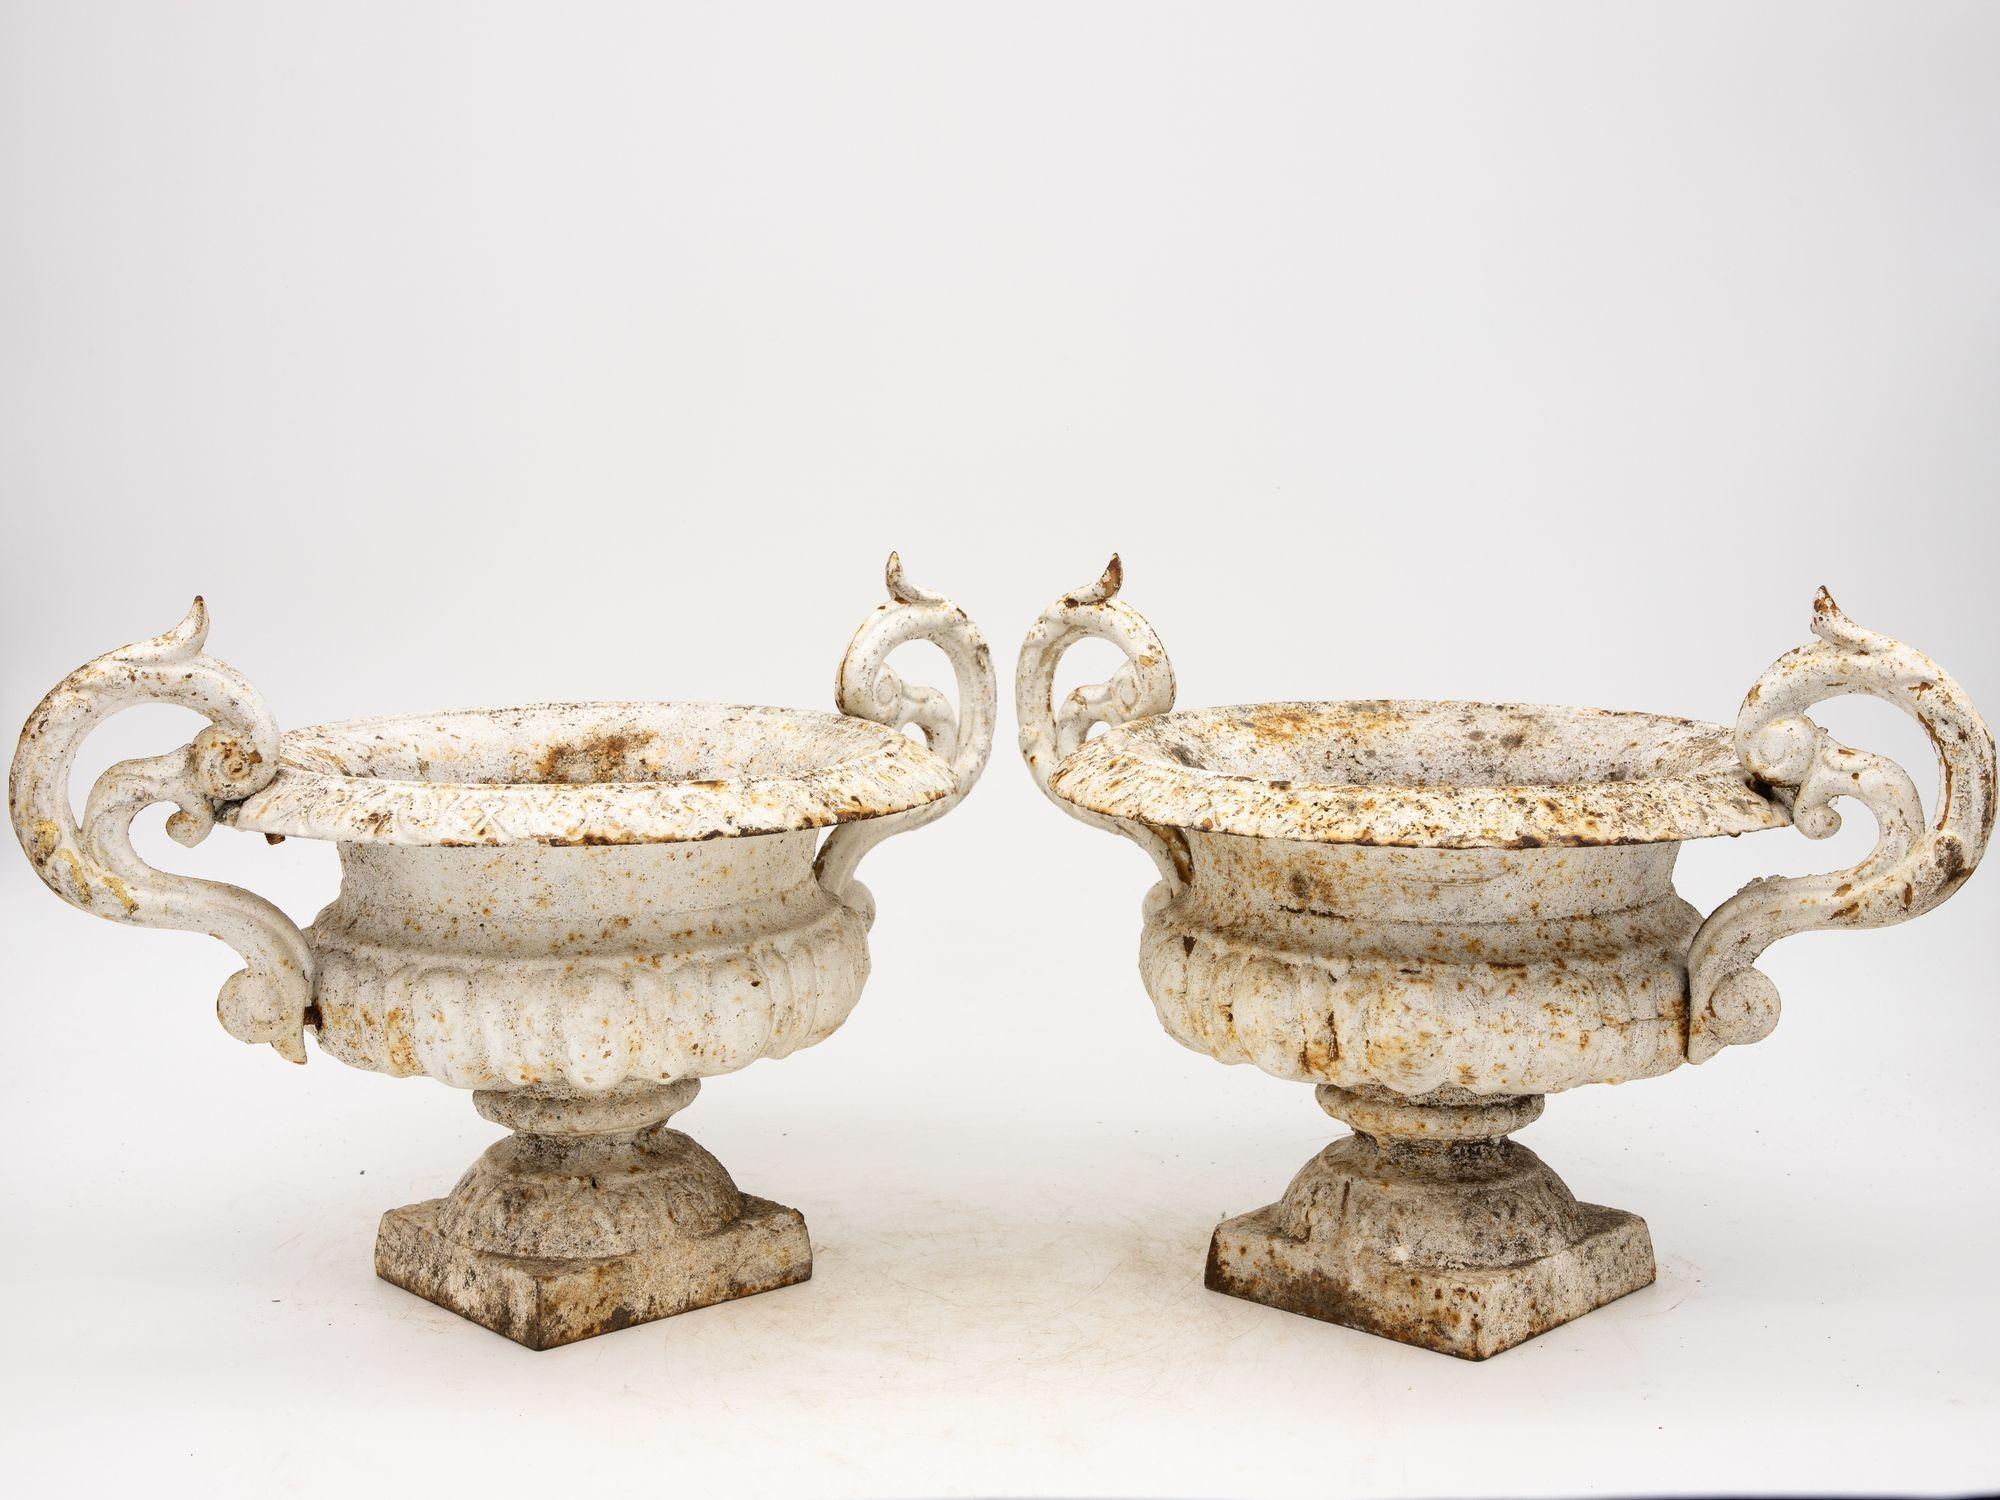 Exuding timeless elegance, this exquisite pair of late 19th-century French garden urns captures the essence of French garden design. Standing as guardians of history, each urn is adorned with timeworn white paint that has gracefully weathered over